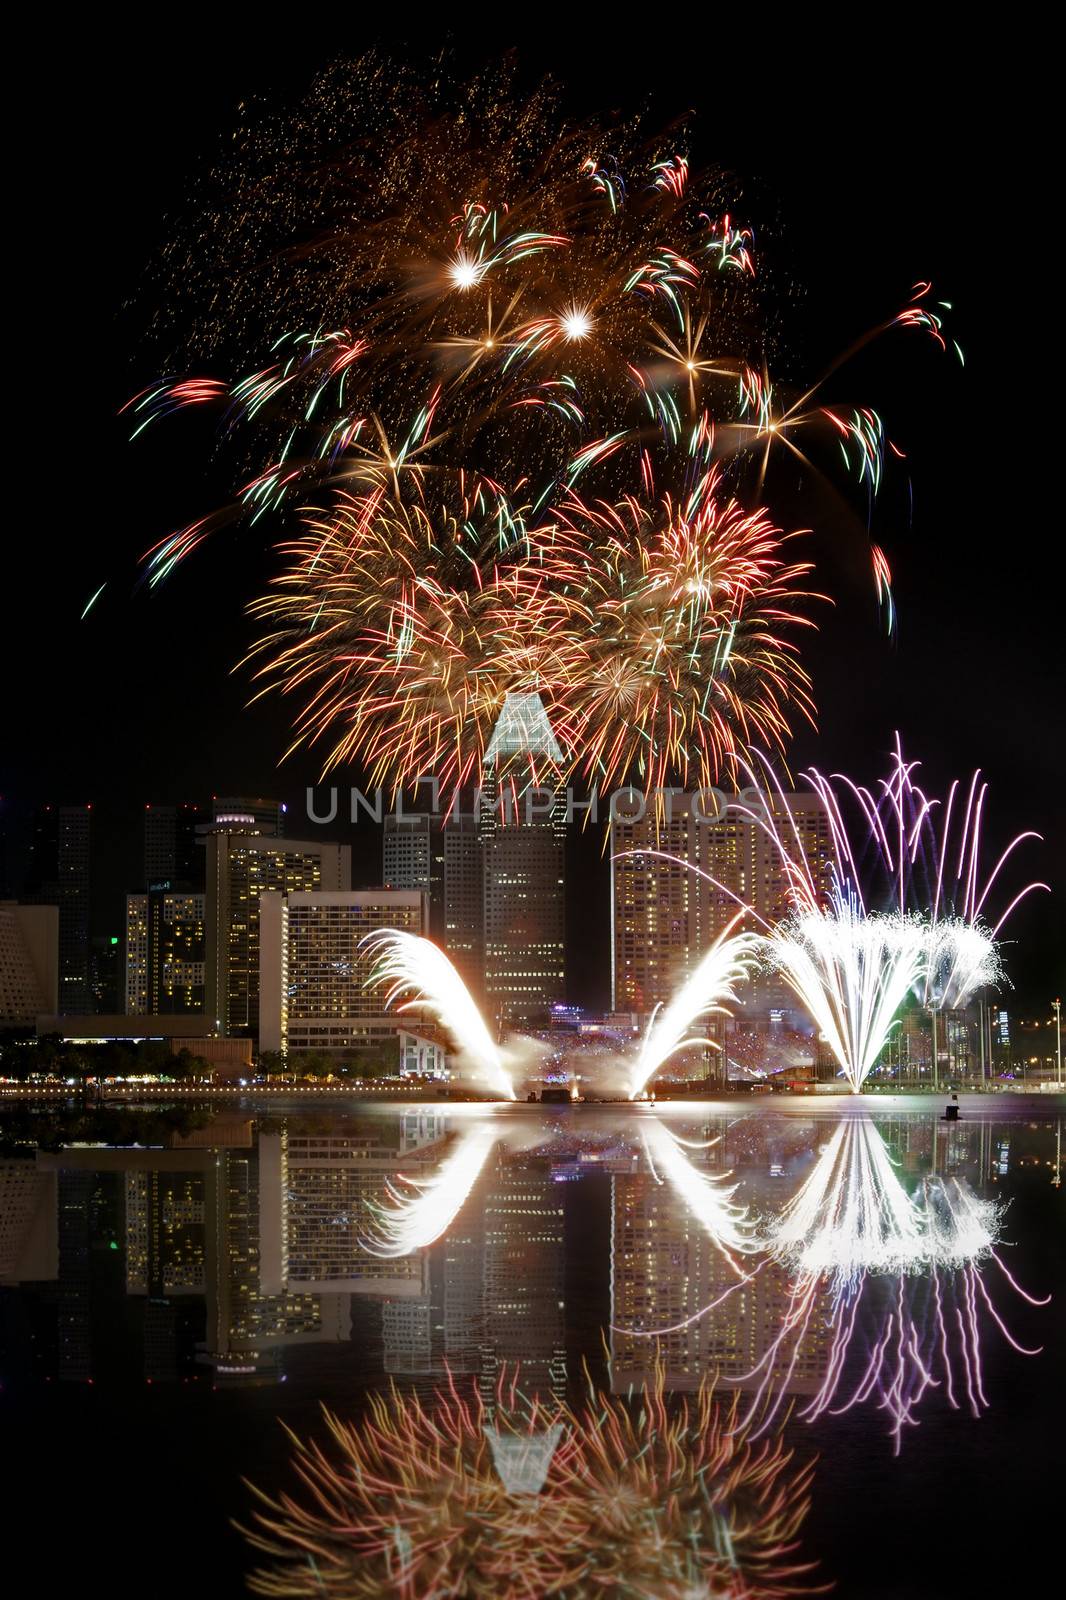 Fireworks over Marina bay in Singapore on National day